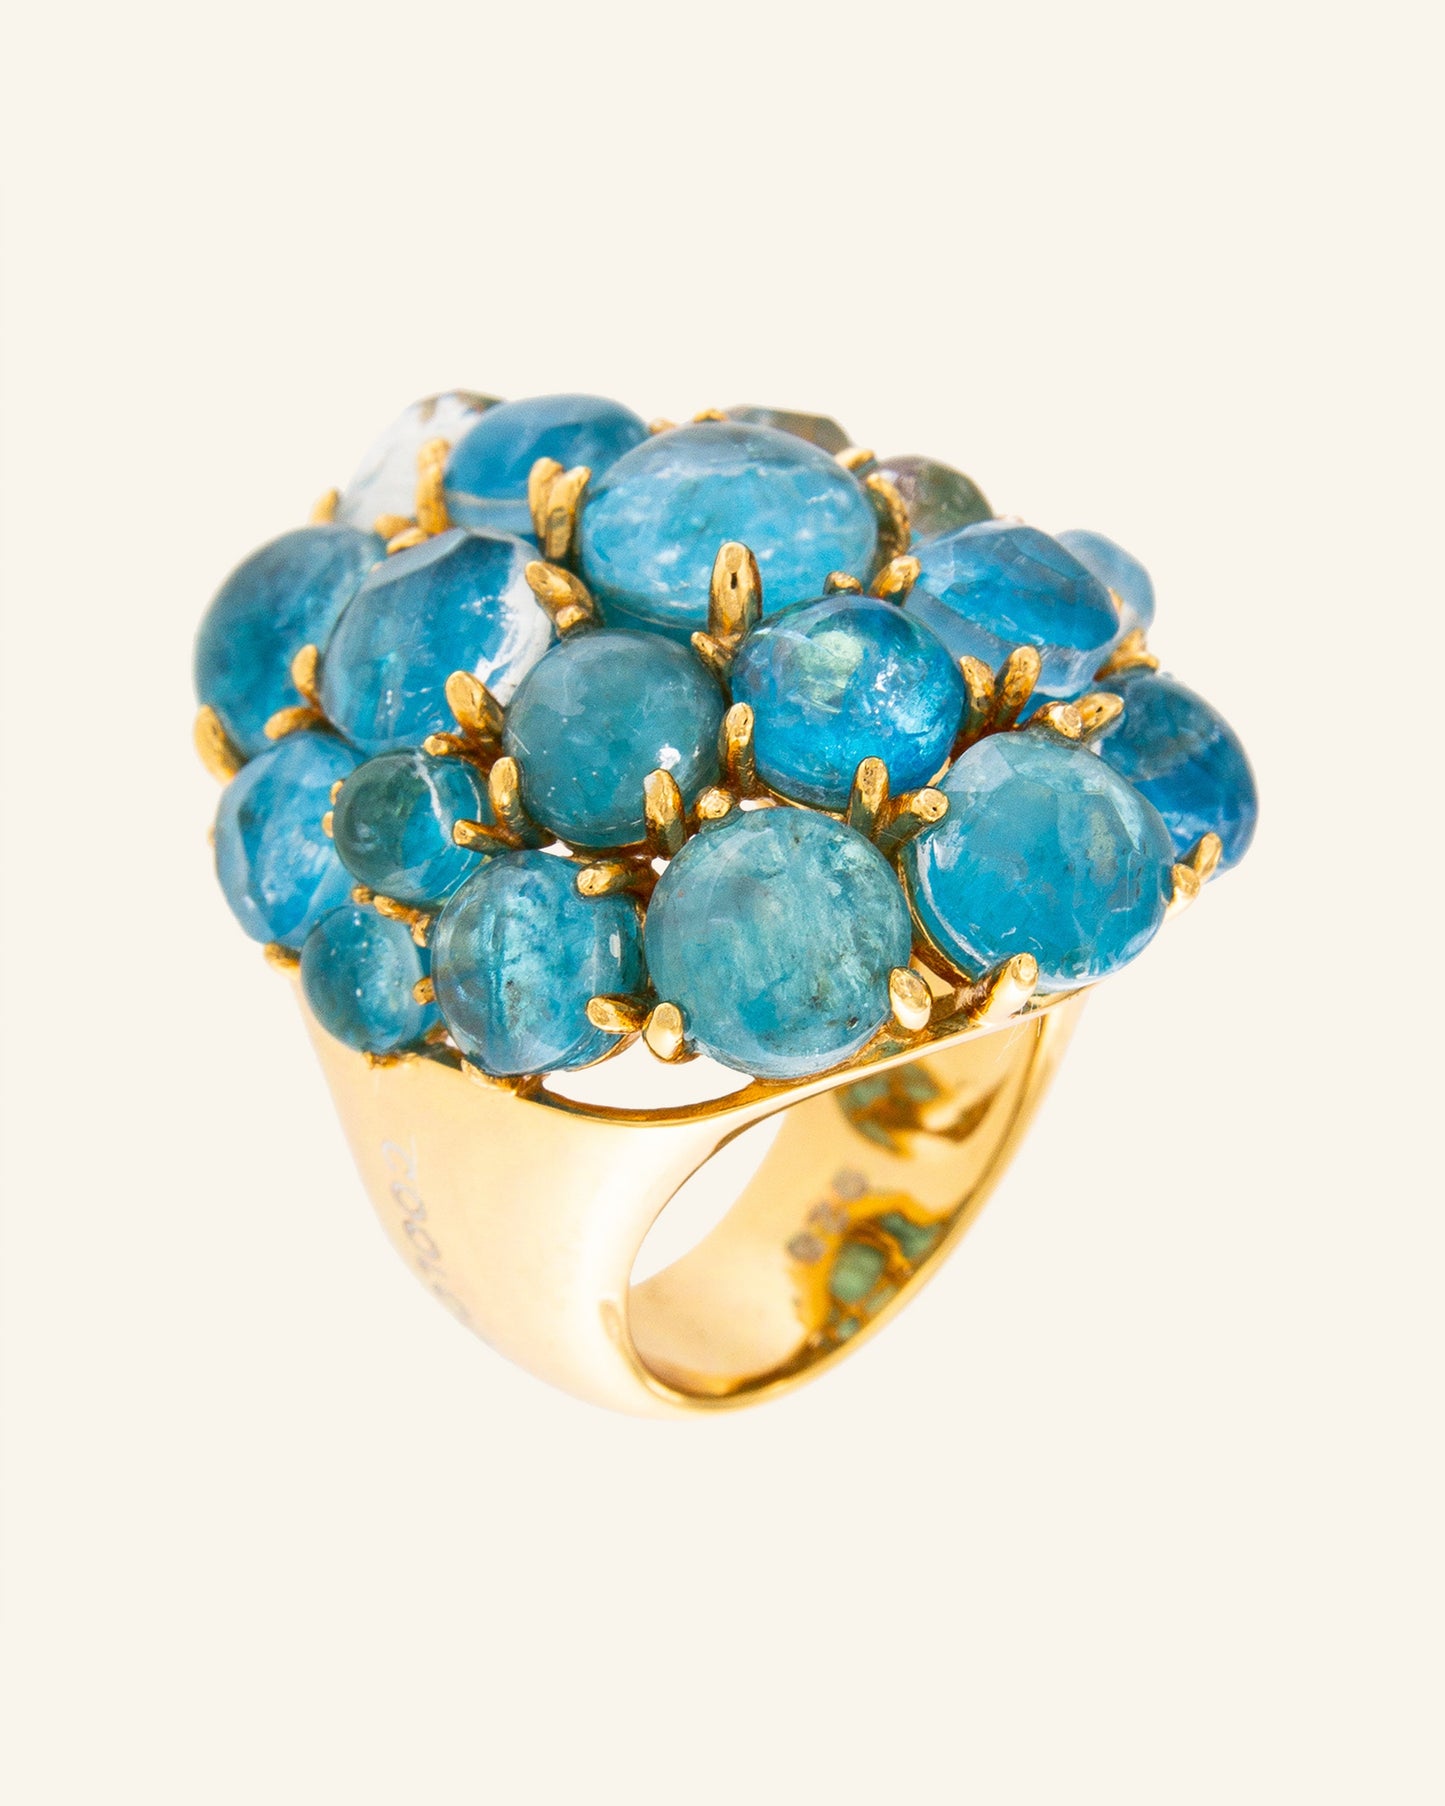 Liberis ring with blue apatite